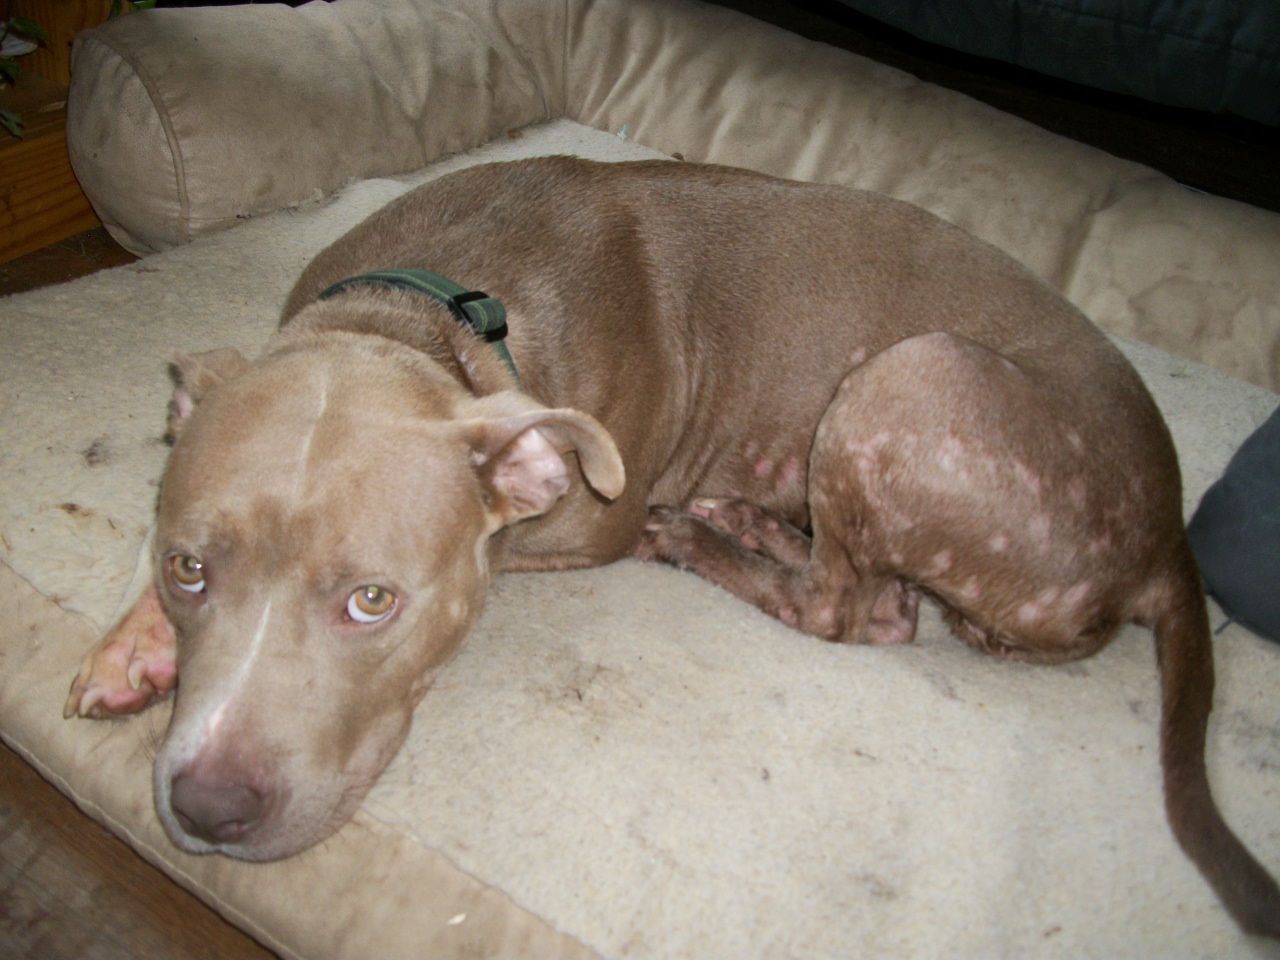 Do you know the symptoms and treatment of mange in dogs?